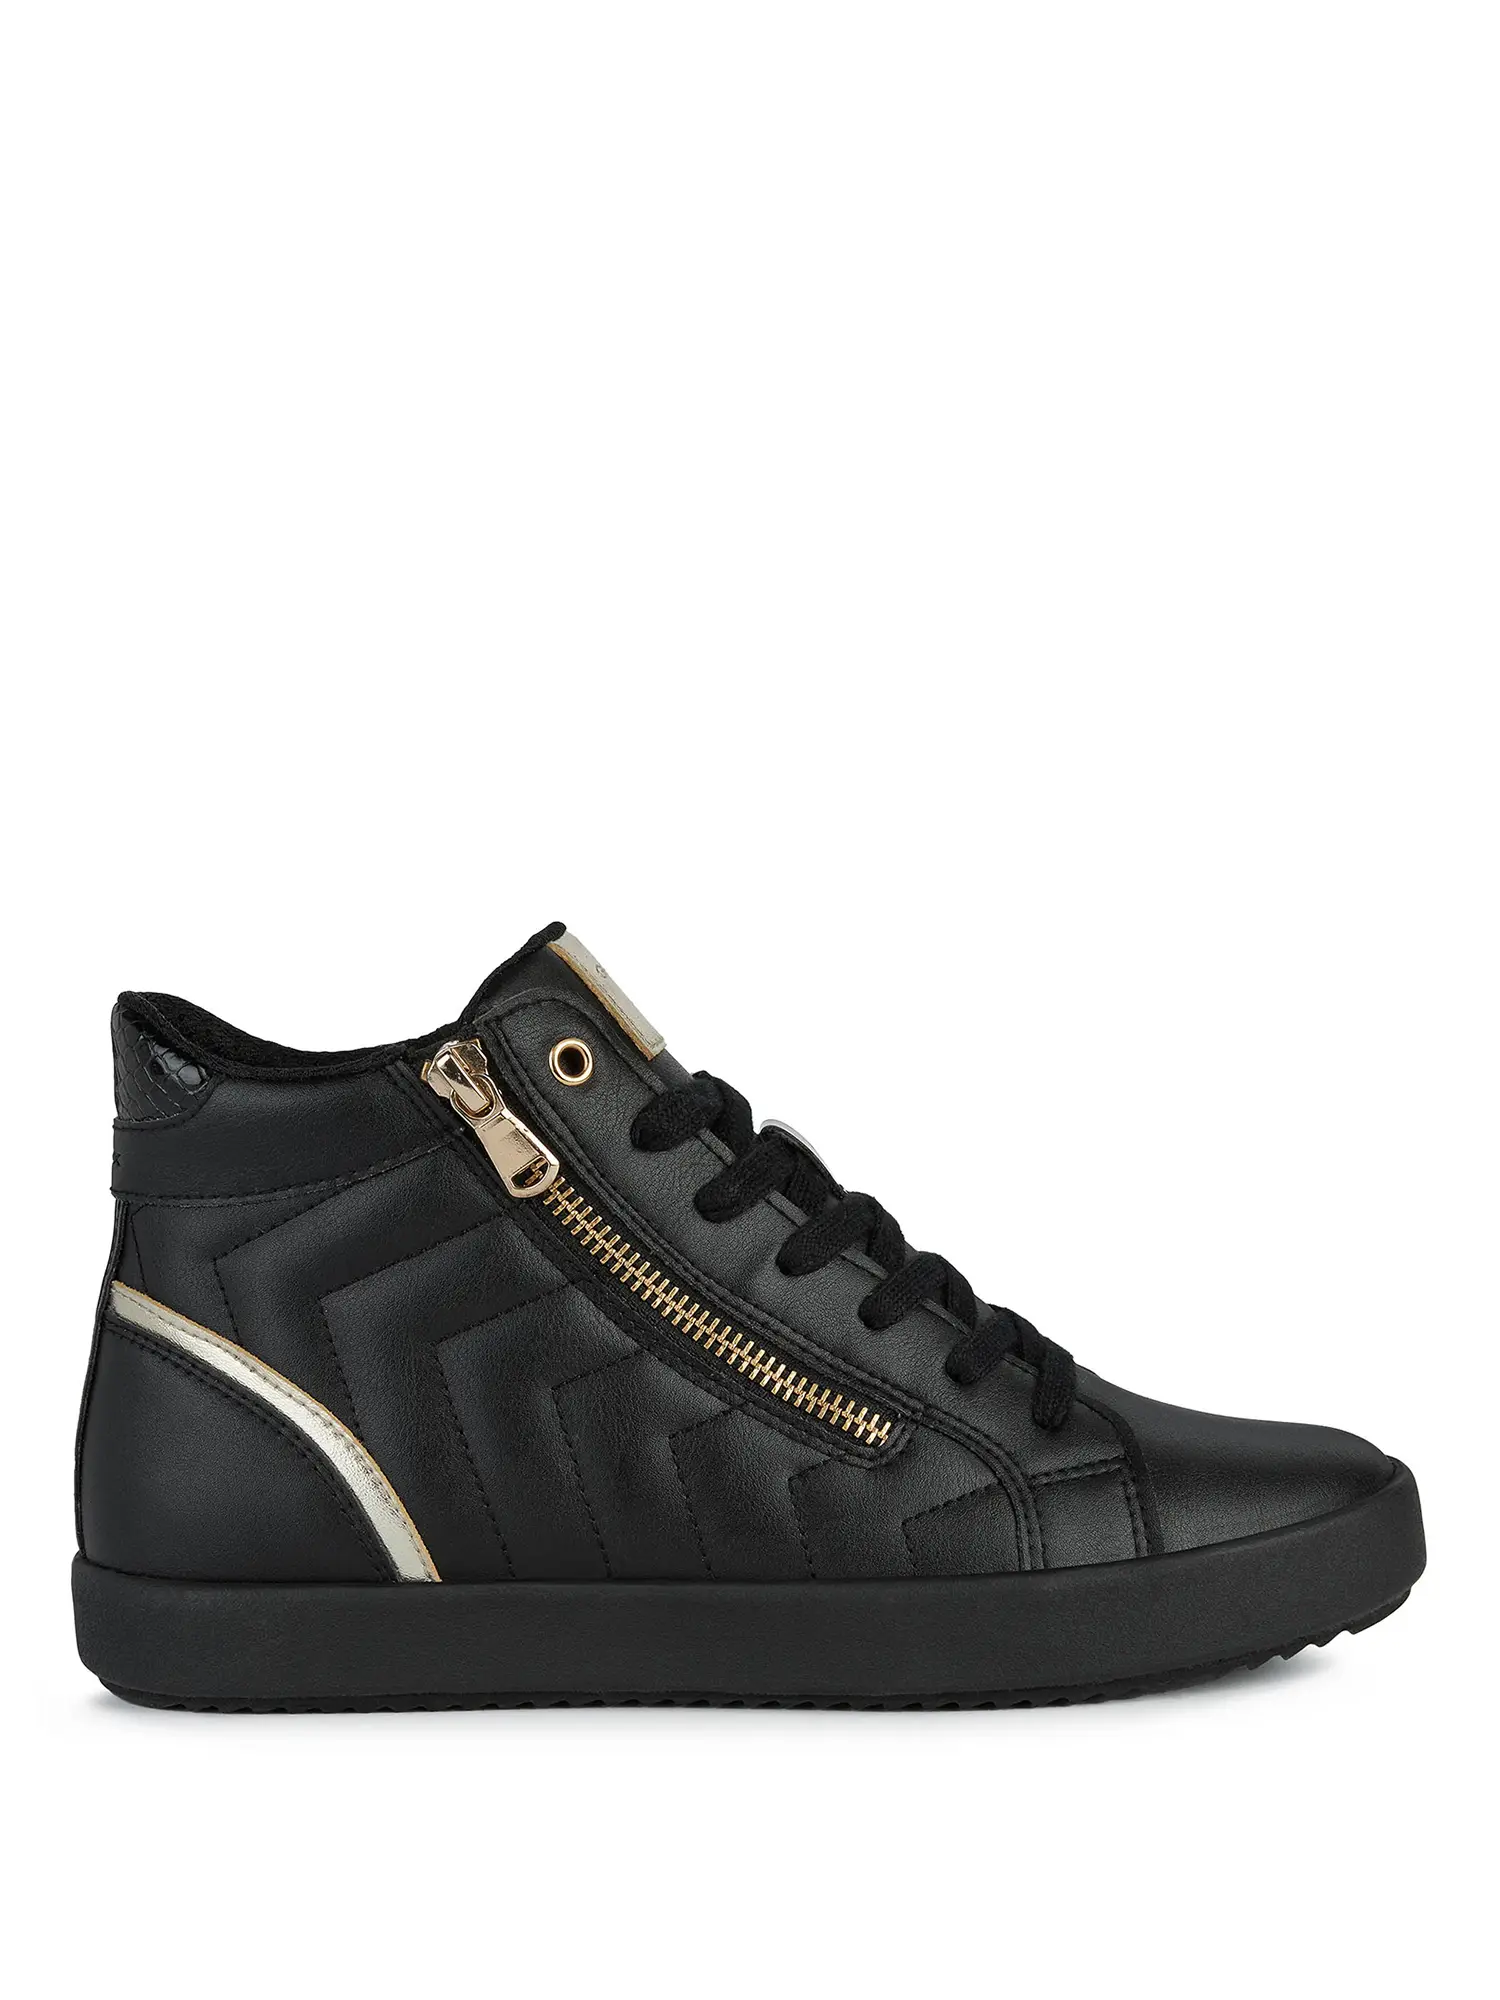 SNEAKERS DONNA - GEOX - D266HE 0BCAR - NERO, 36